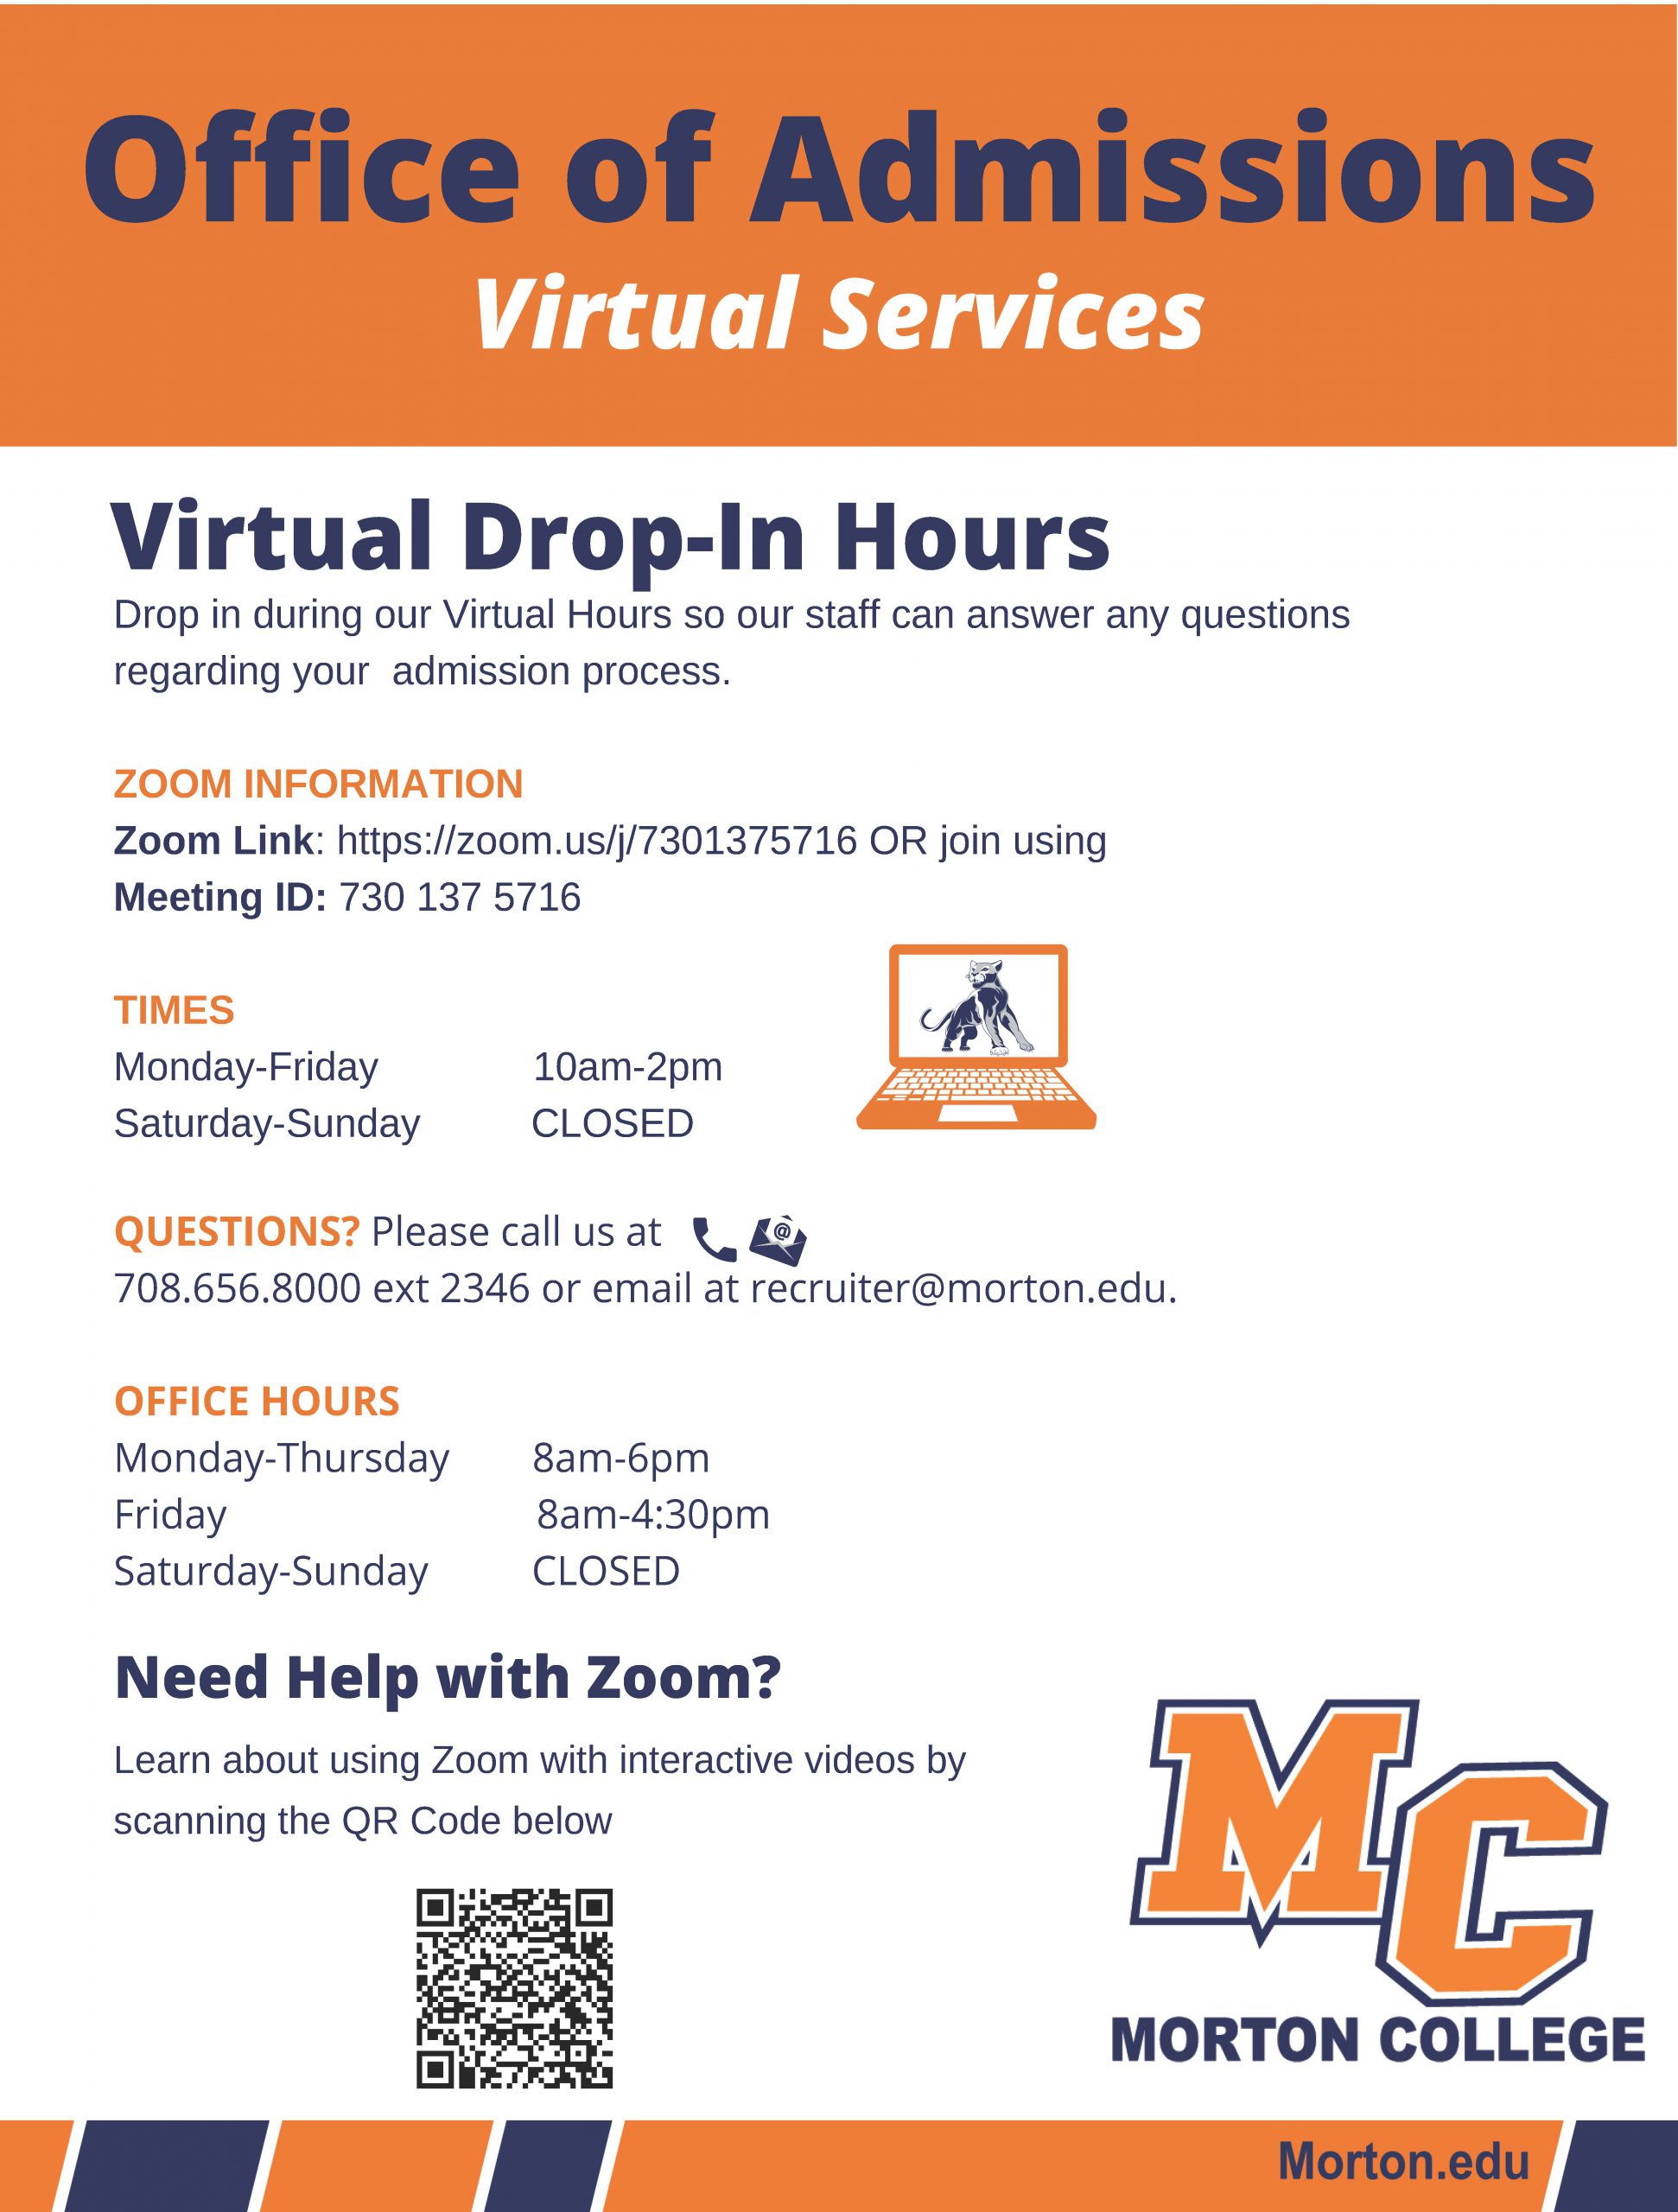 MC_Office of Admissions Virtual Services